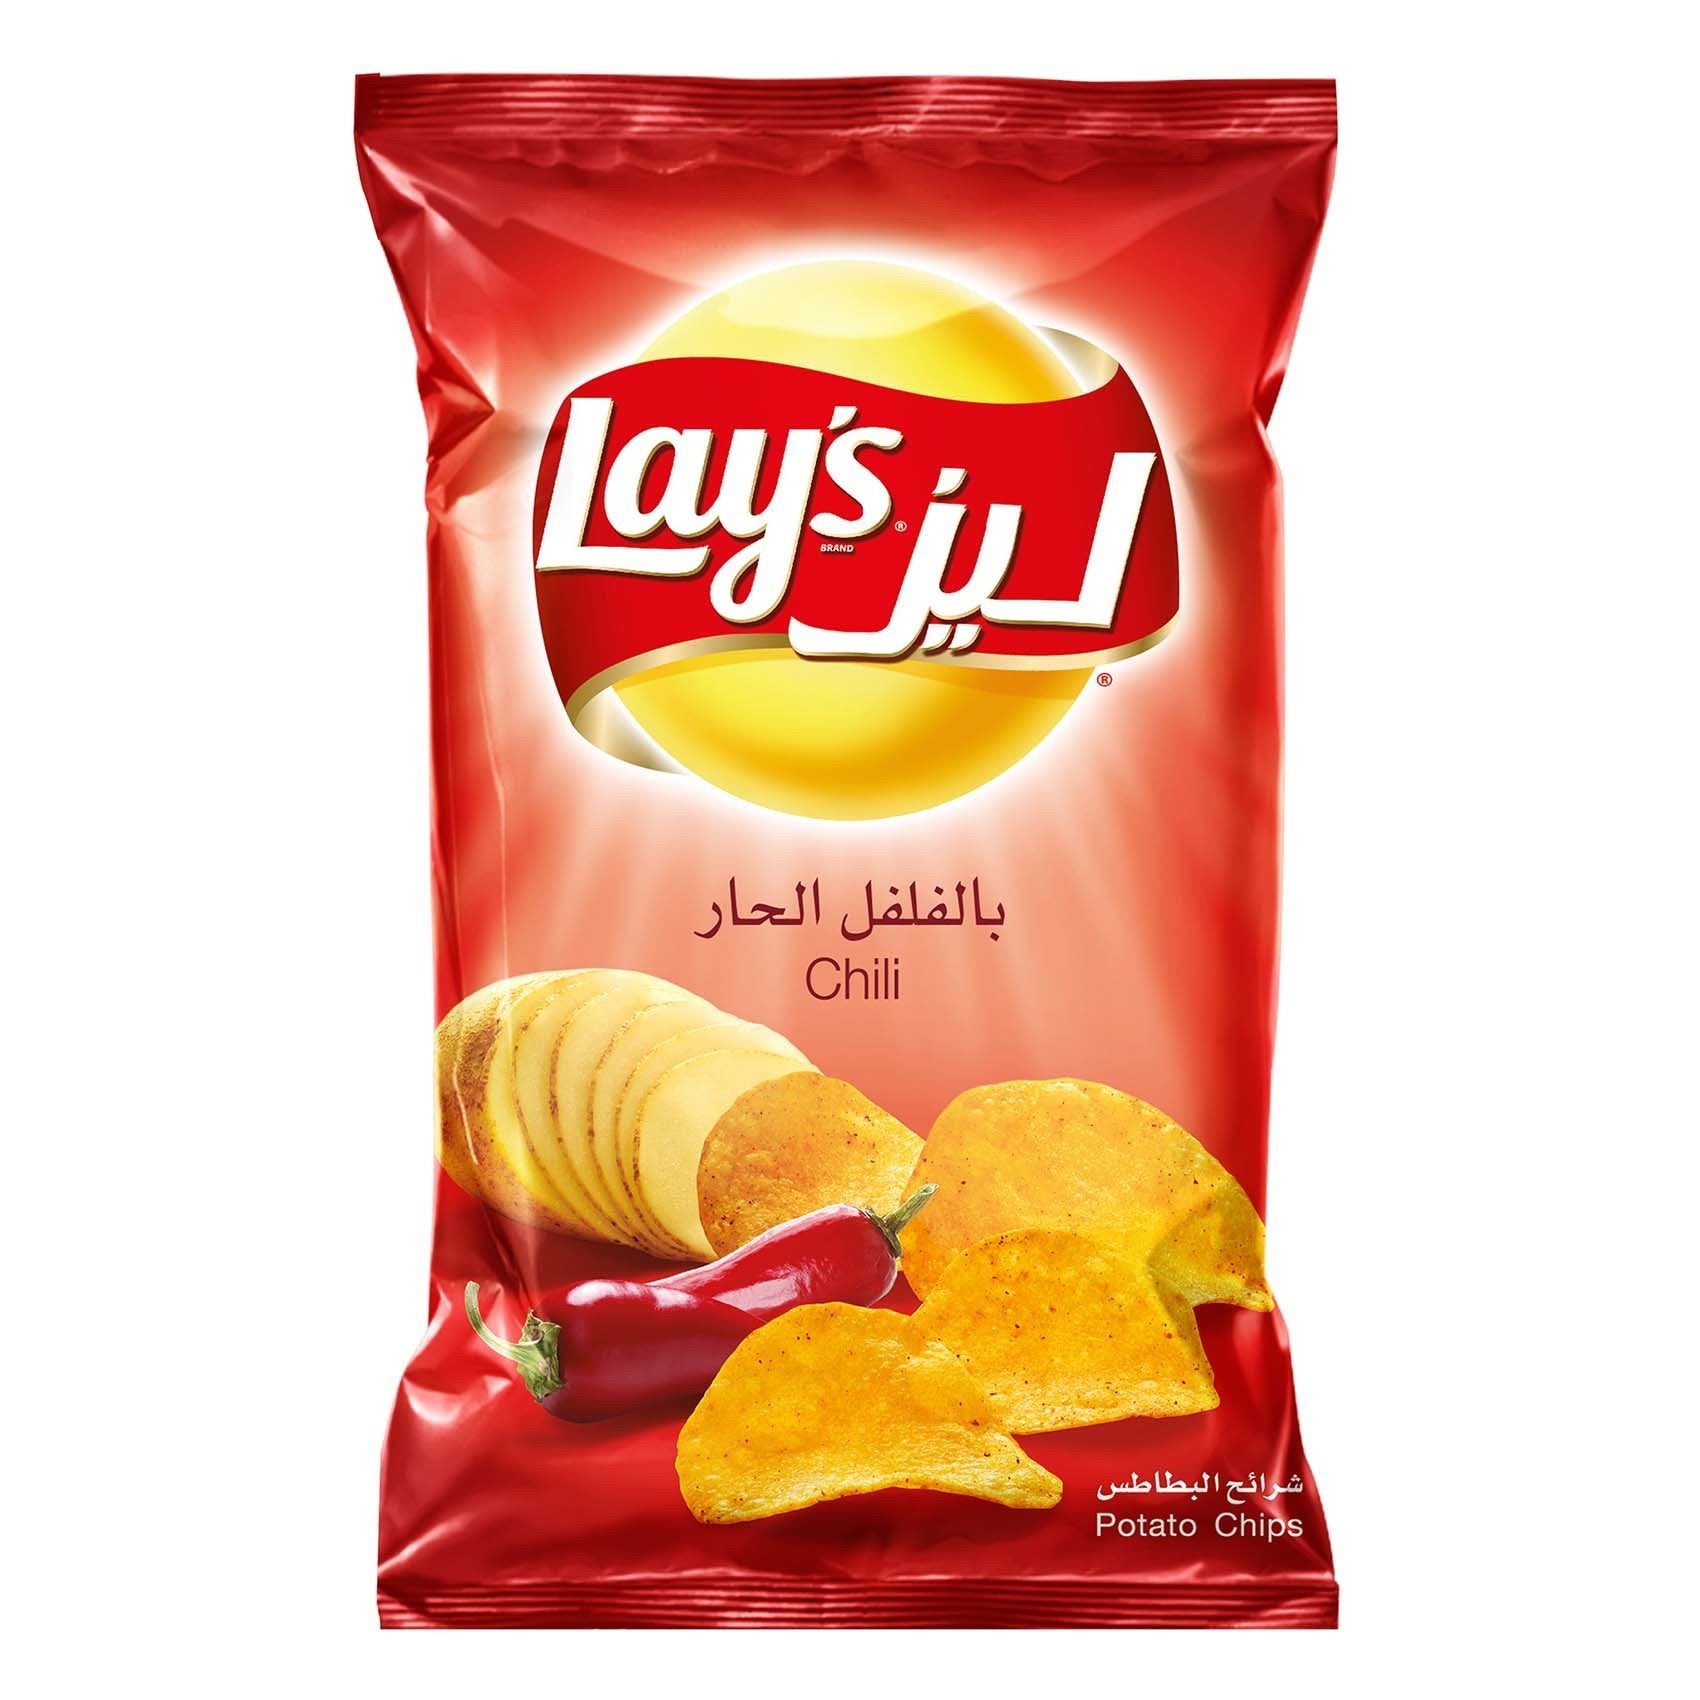 Lays Chilli Chips